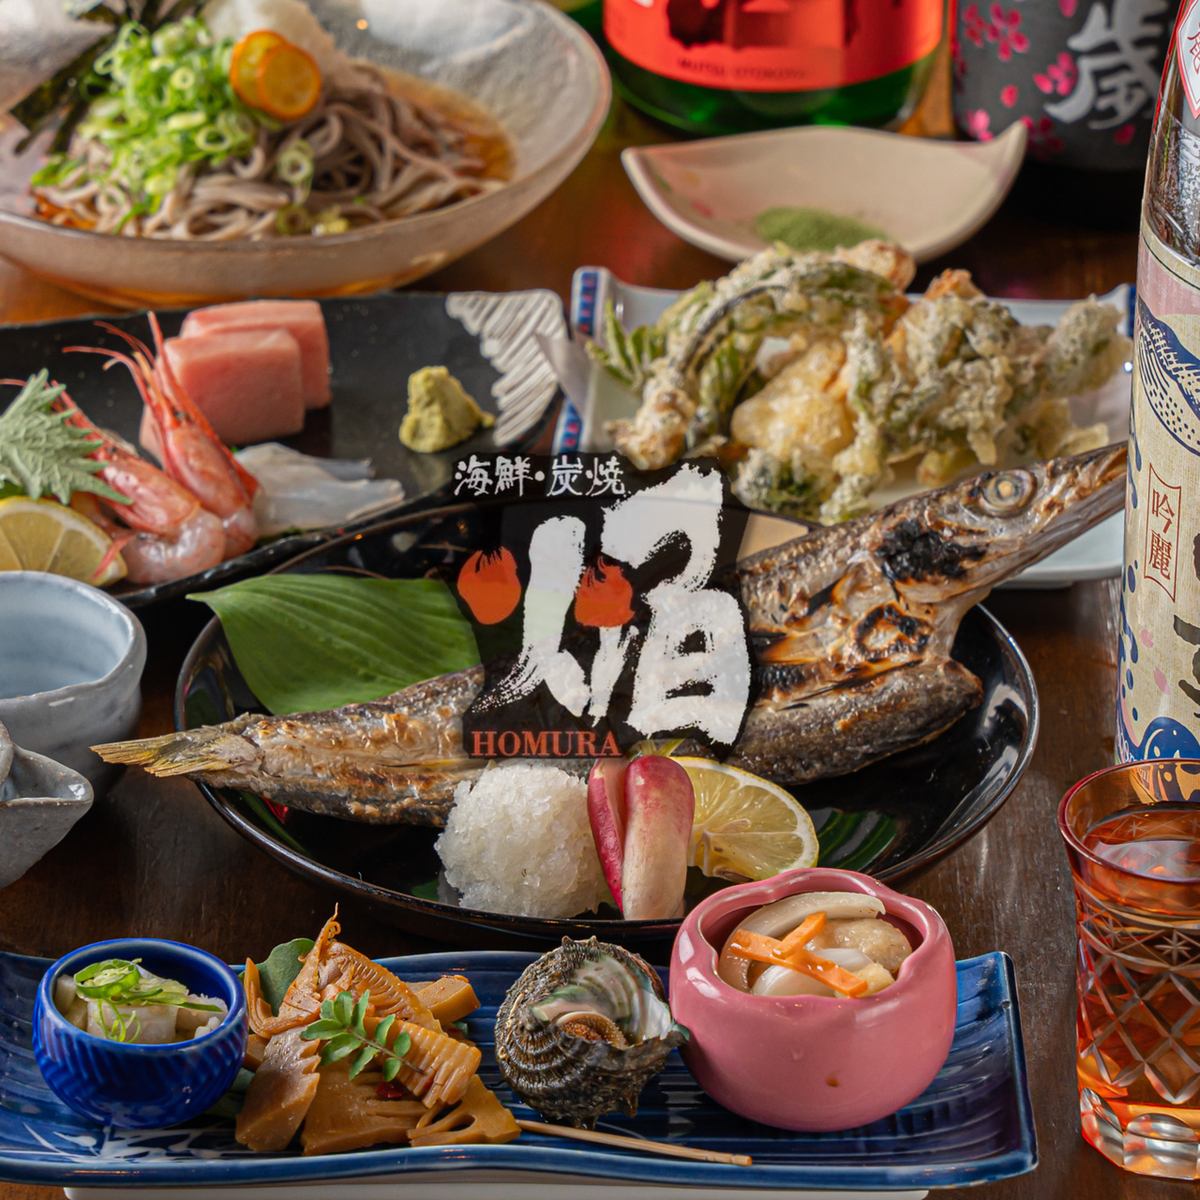 Enjoy charcoal-grilled seafood served in a calm Japanese atmosphere ◎Recommended as a hideout bar◎